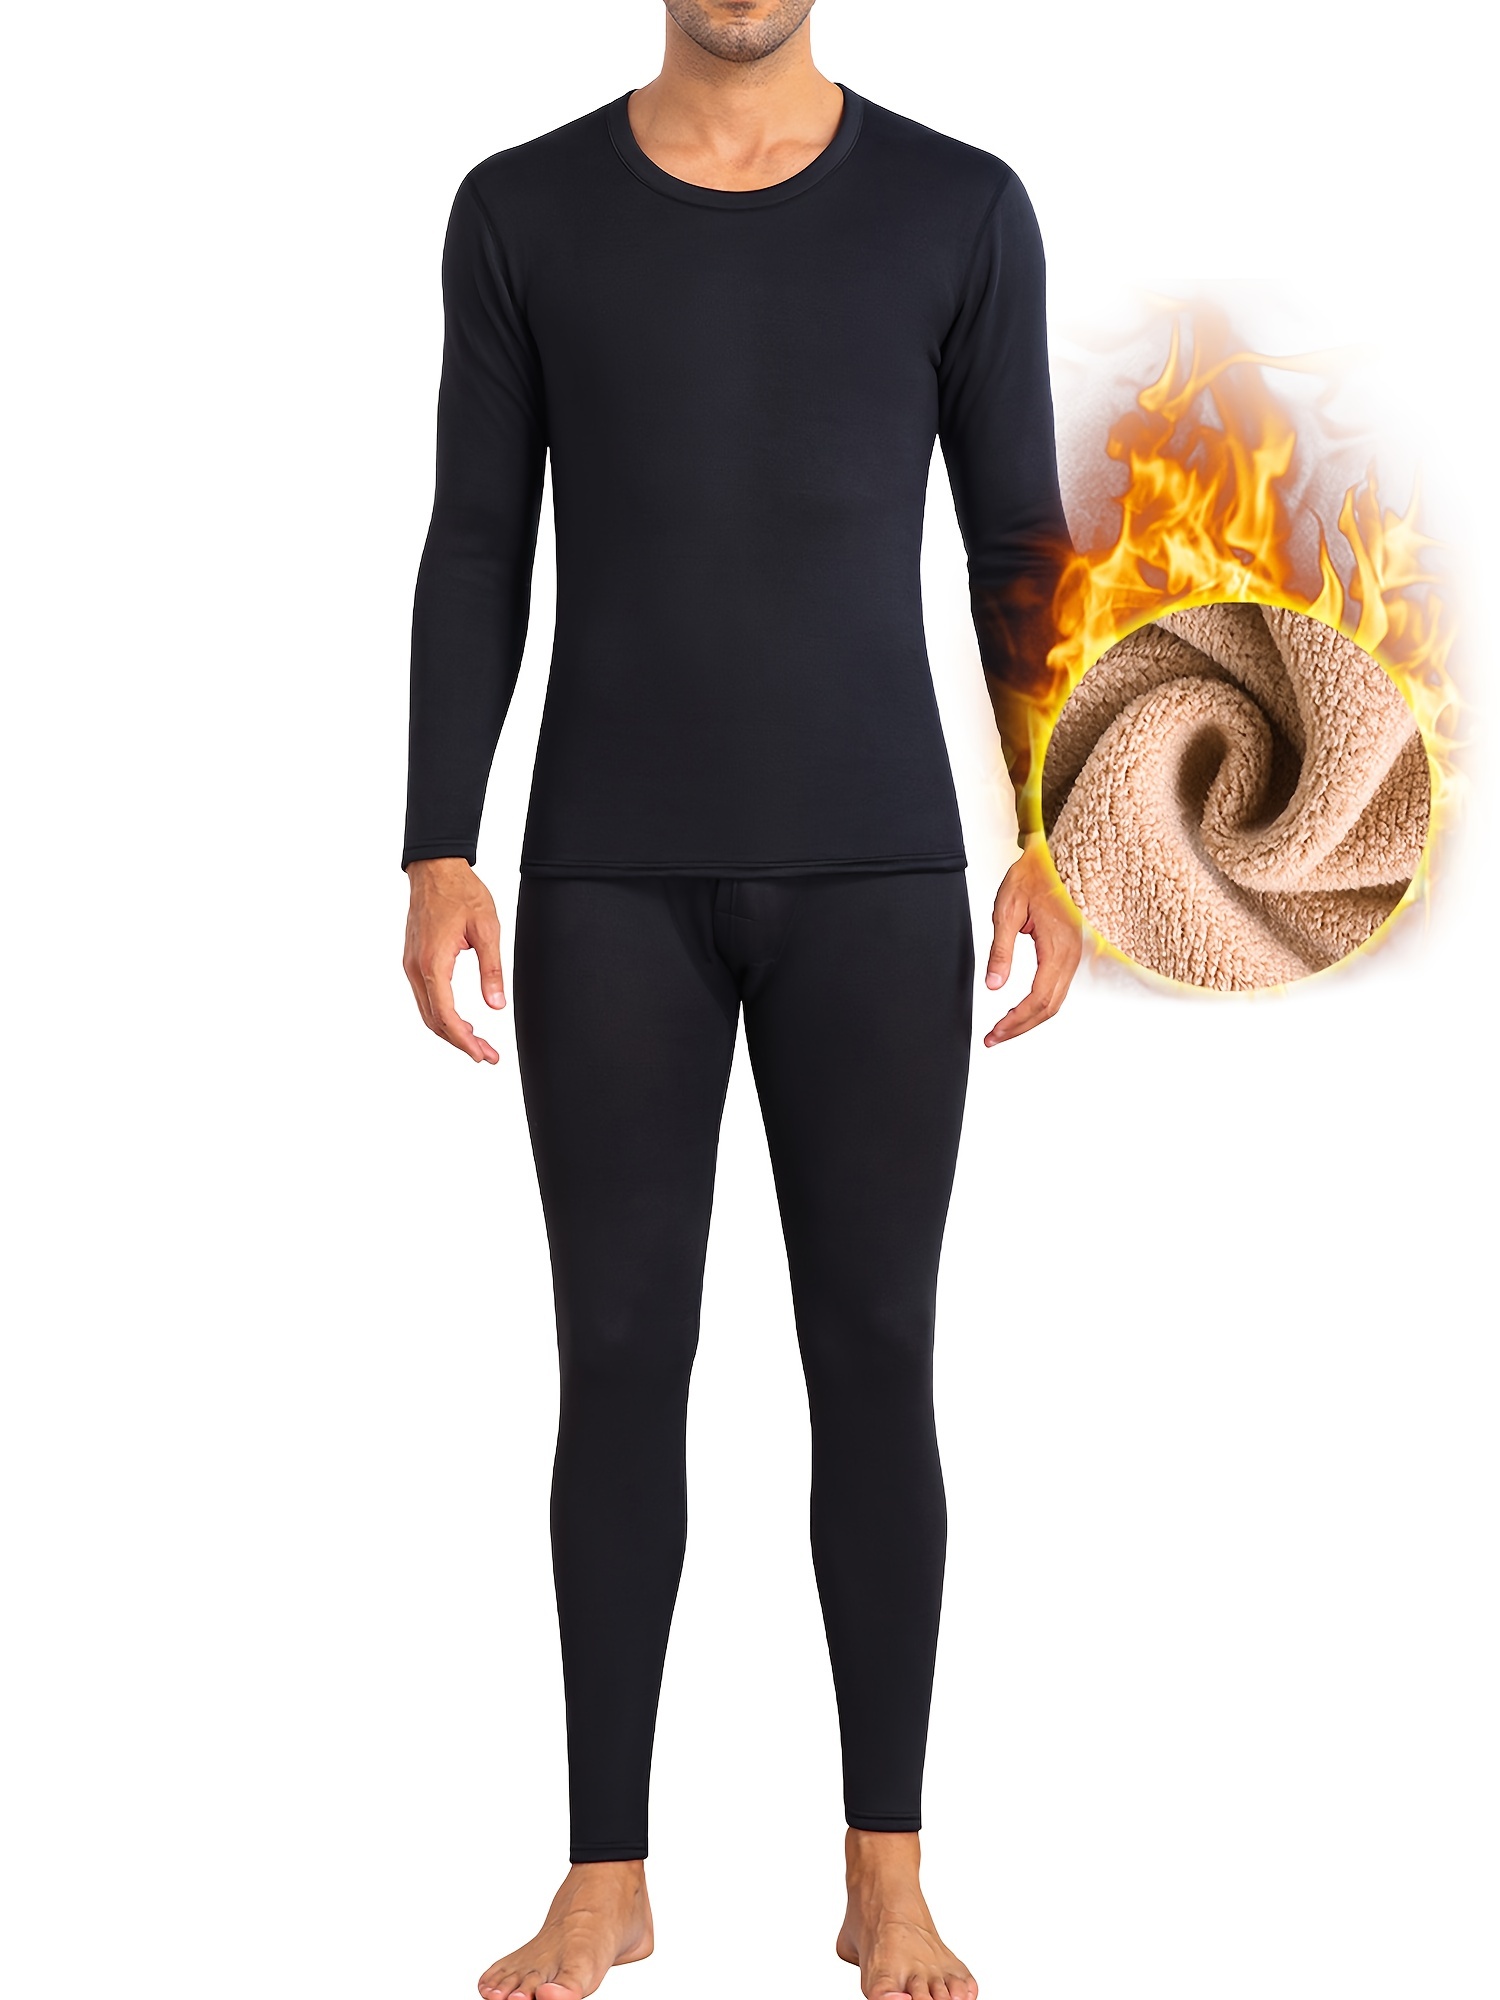 Homenesgenics Thermal Underwear Long Underwear 2-Piece Set Outdoor Warm  Clothing Heated for Riding Skiing Fishing Charging Via Heated Thermal